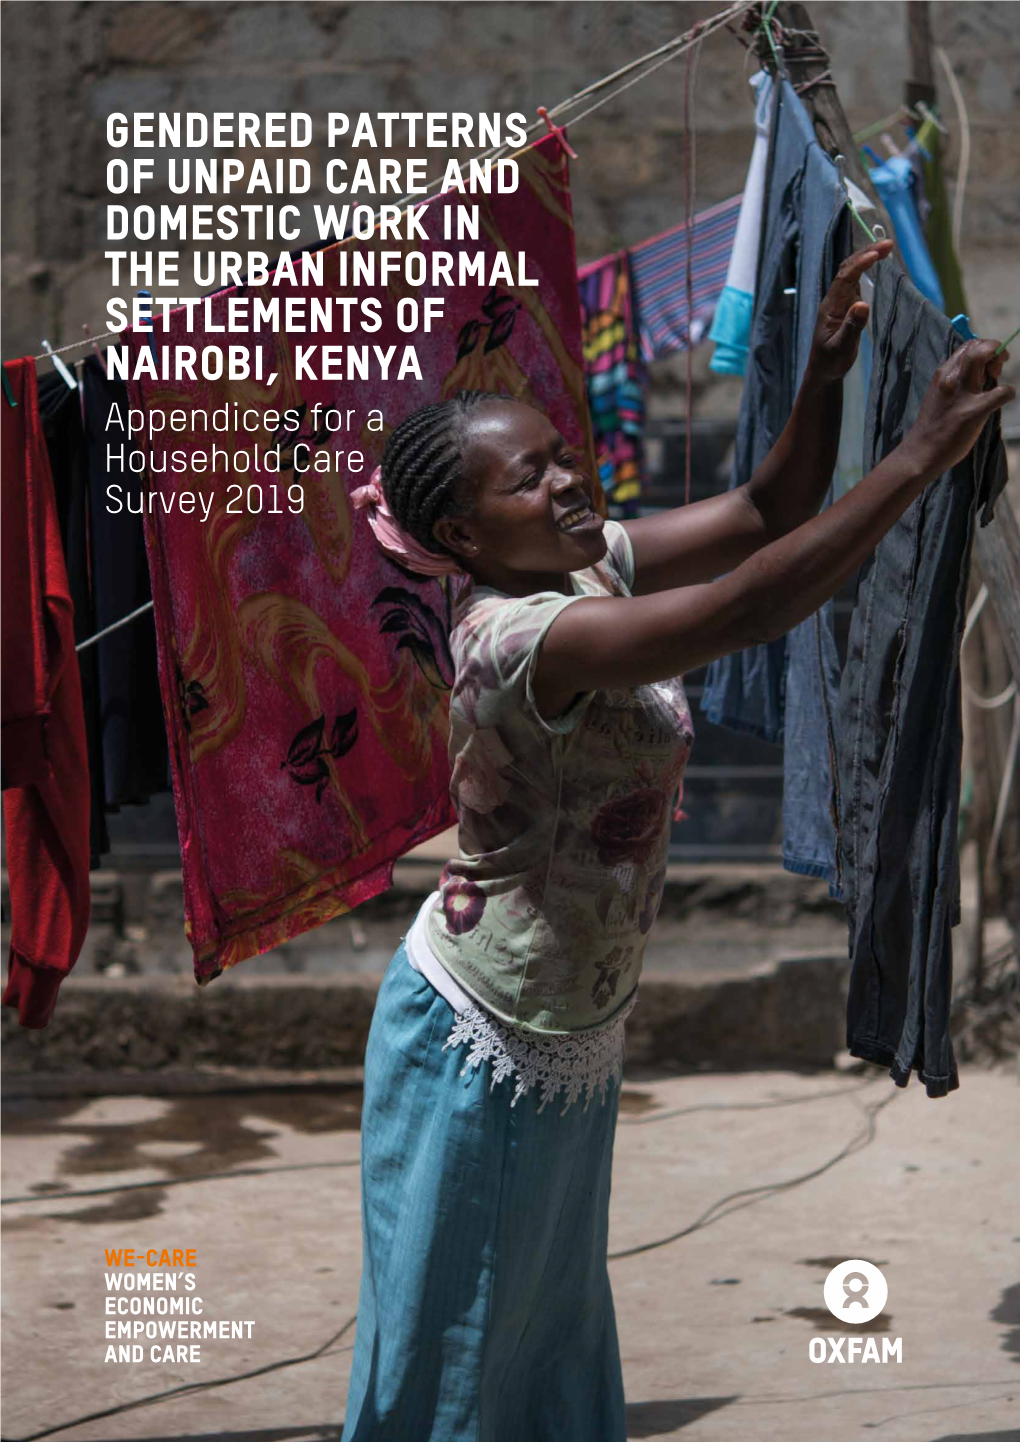 GENDERED PATTERNS of UNPAID CARE and DOMESTIC WORK in the URBAN INFORMAL SETTLEMENTS of NAIROBI, KENYA Appendices for a Household Care Survey 2019